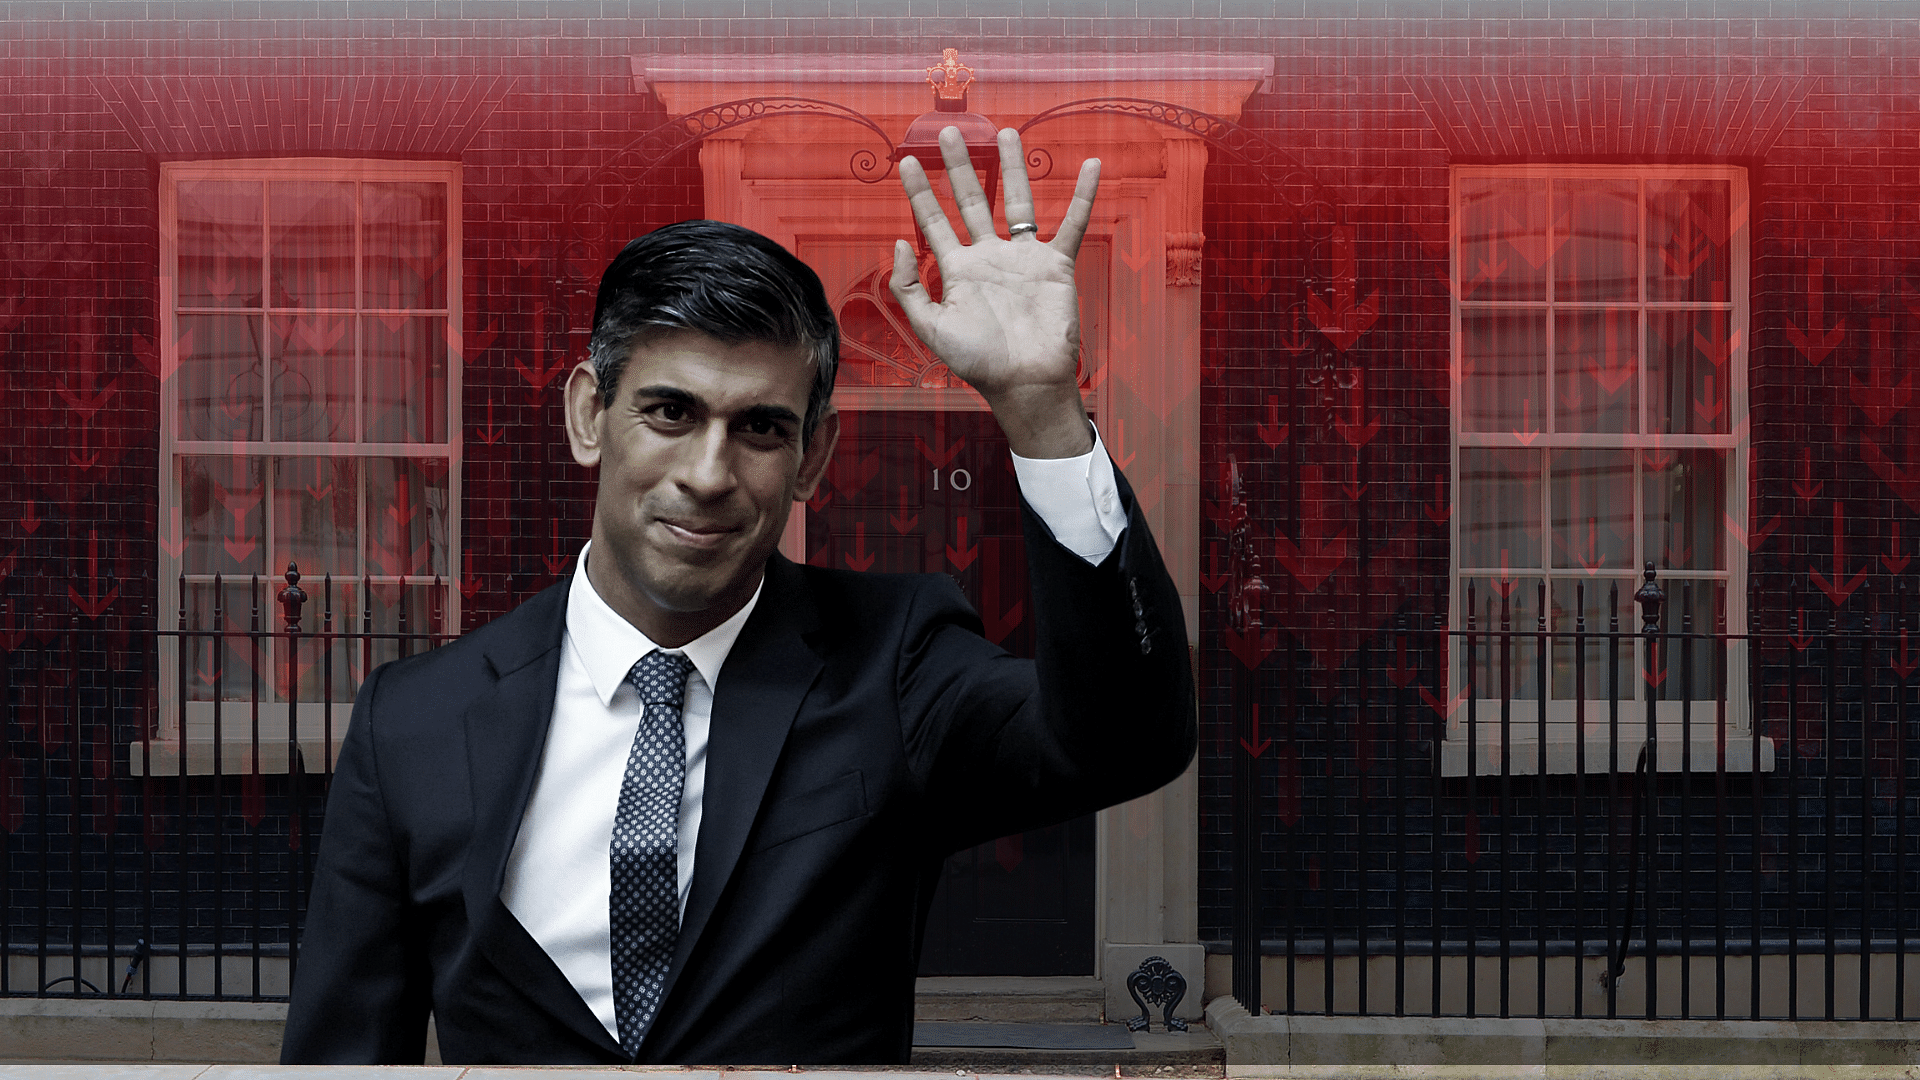 <div class="paragraphs"><p>After <a href="https://www.thequint.com/voices/opinion/diwali-cheer-for-rishi-sunak-has-the-shadow-of-empire-been-erased-in-uk-indian-origin-prime-minister-of-britain">Rishi Sunak</a> was installed as the United Kingdom's prime minister by <a href="https://www.thequint.com/topic/king-charles-iii">King Charles III</a> on Tuesday, 25 October, he said that "mistakes" were made by his predecessor, Liz Truss, and he had been "elected to fix those mistakes."</p></div>